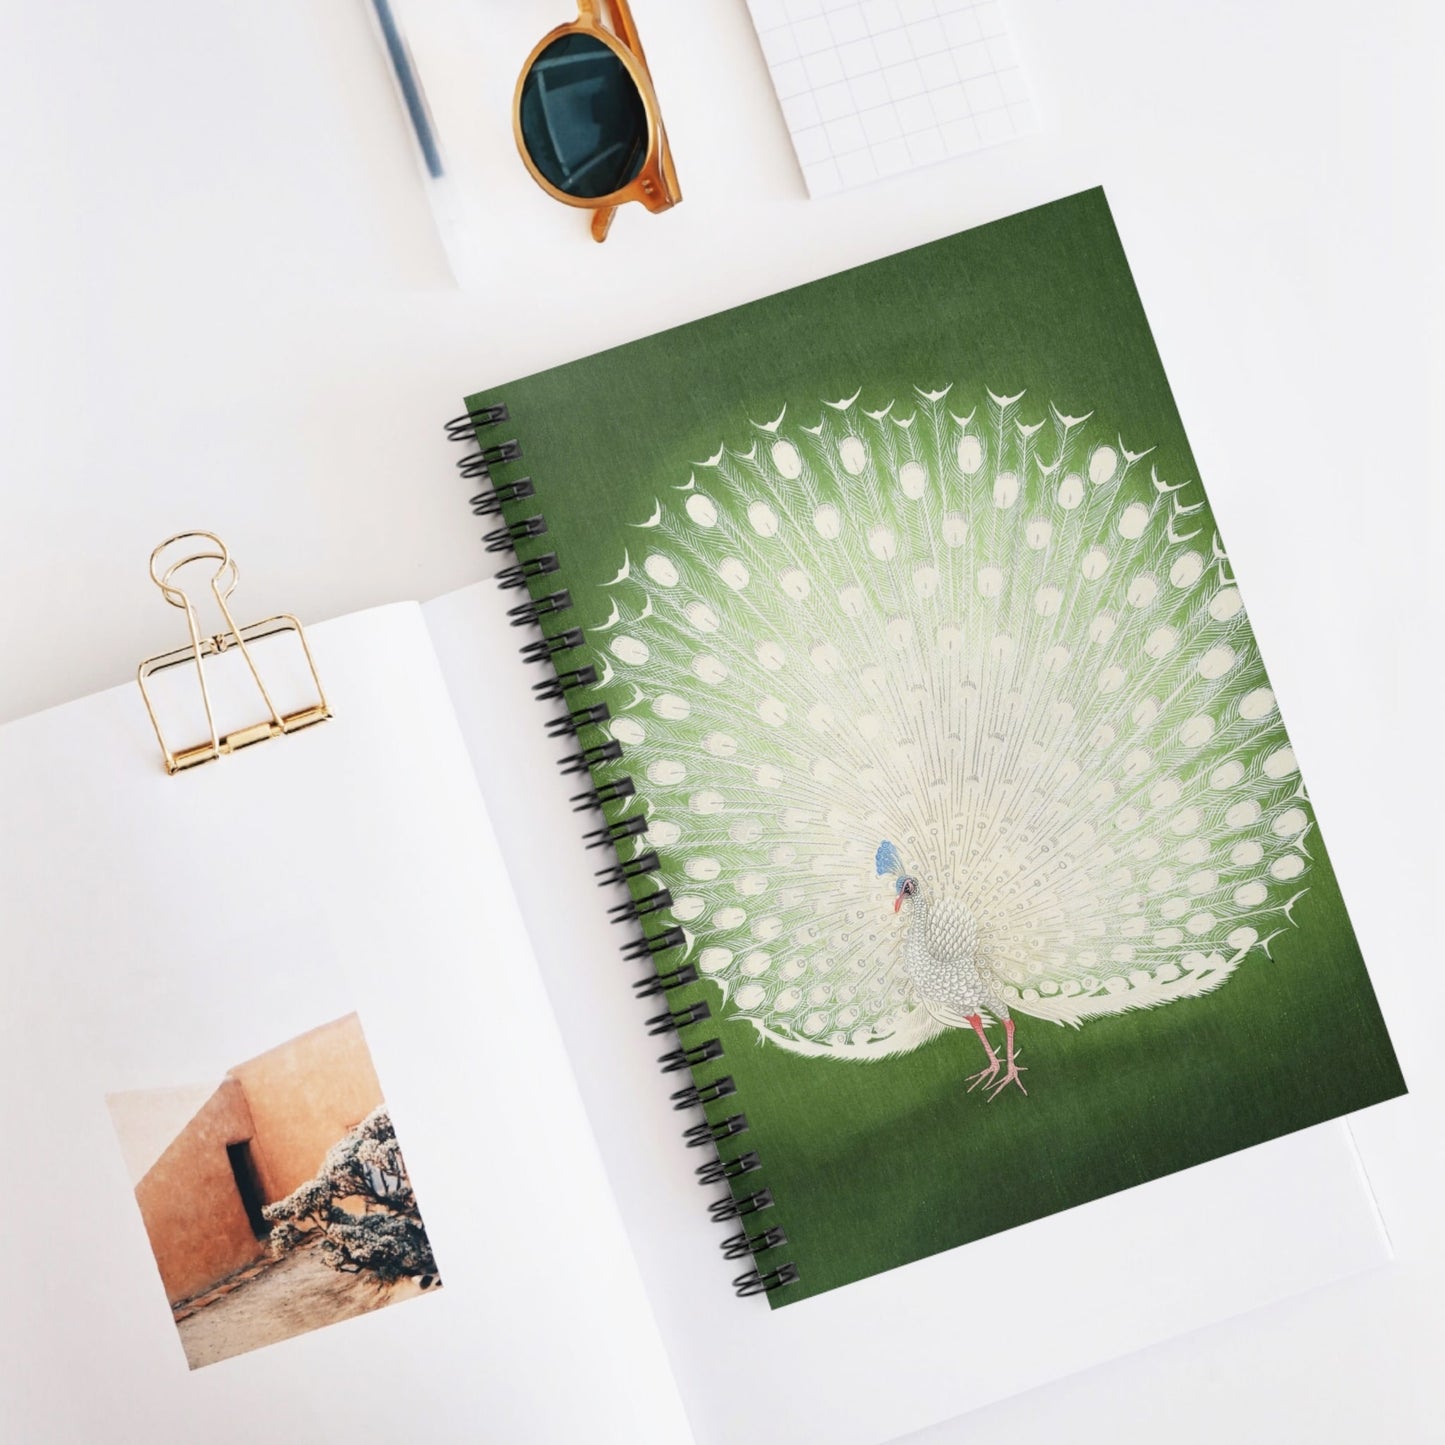 Peacock Feathers Spiral Notebook Displayed on Desk